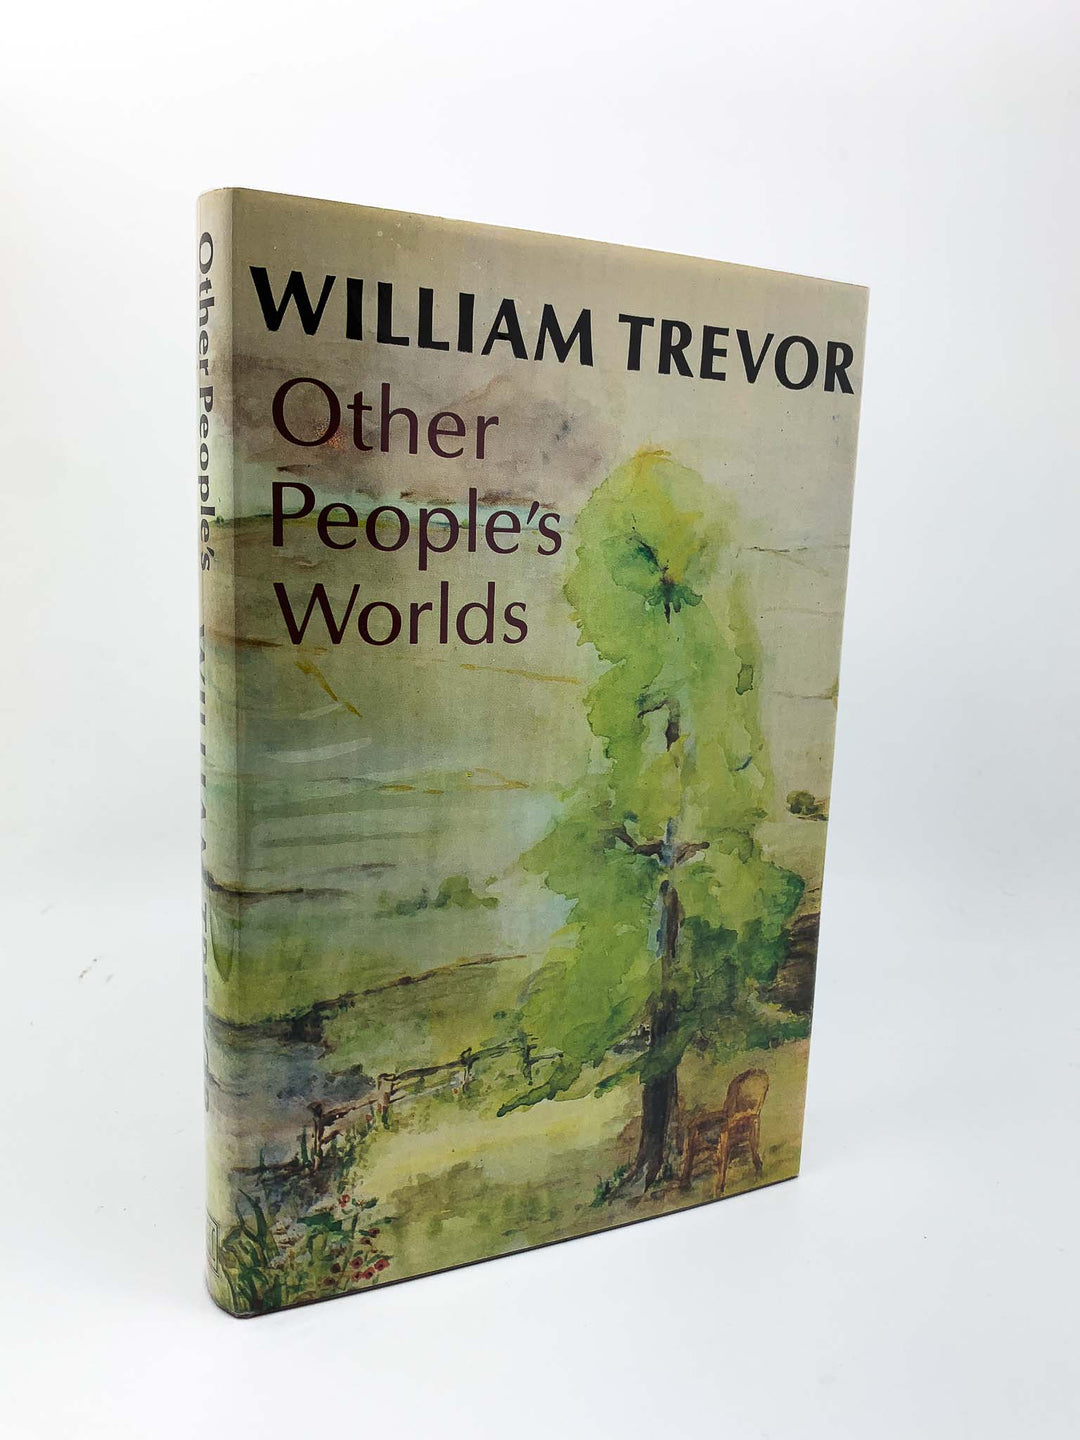 Trevor, William - Other People's Worlds | front cover